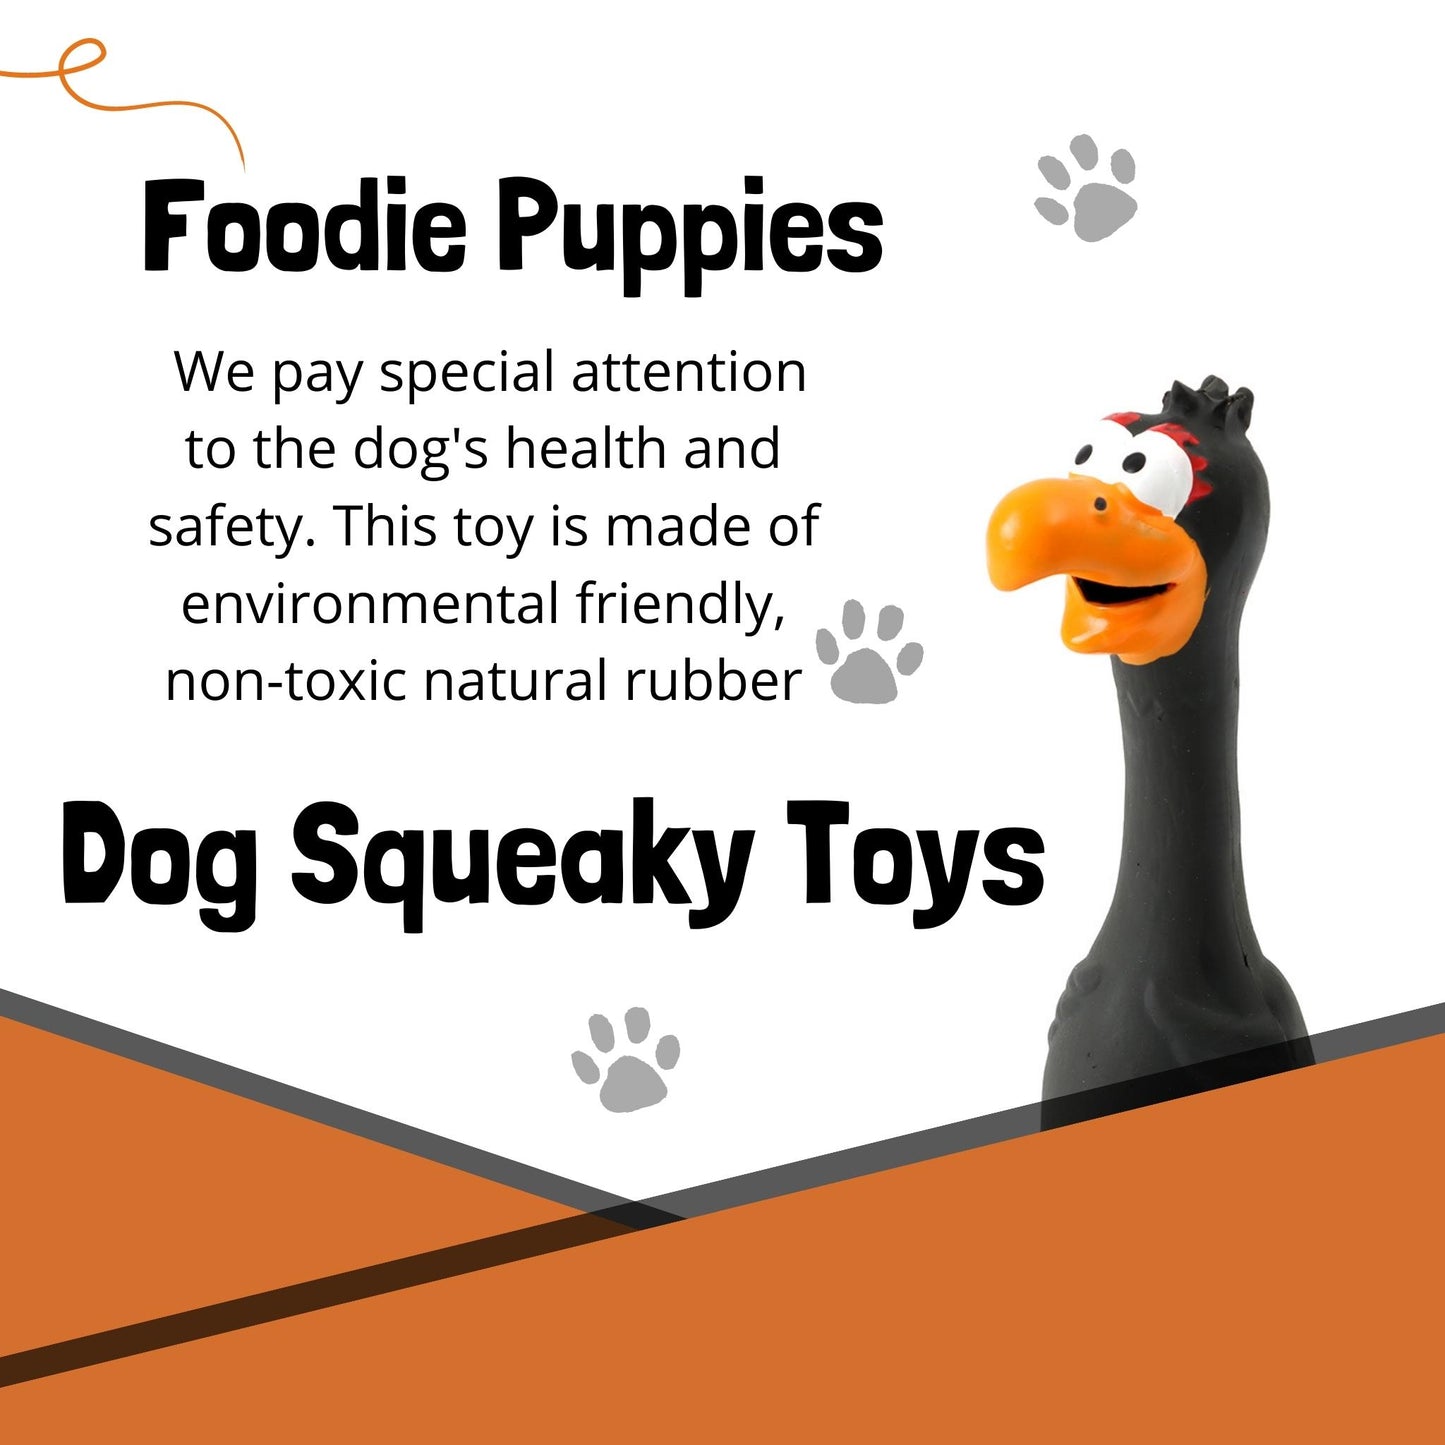 Foodie Puppies Latex Rubber Squeaky Dog Chew Toy - Black Eagle